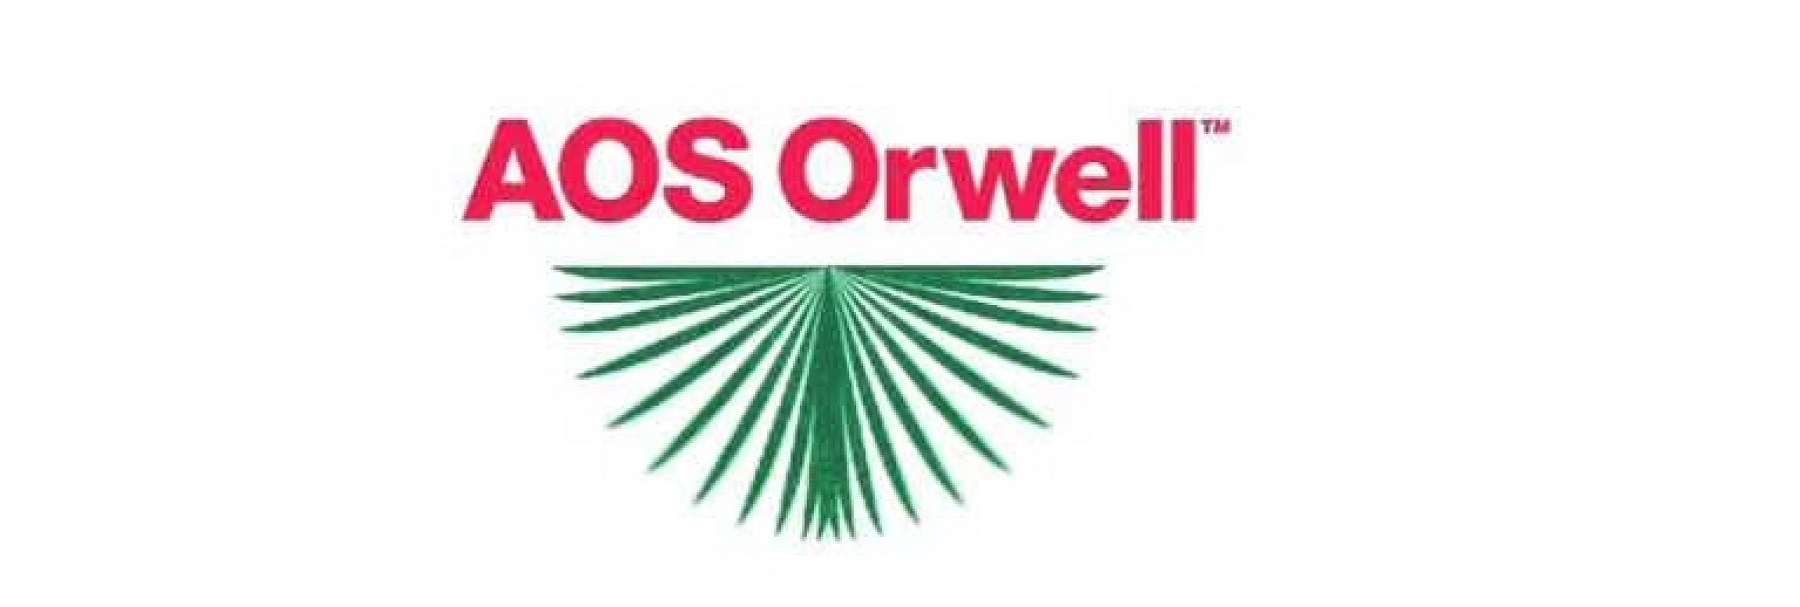 applications-ongoing-aos-orwell-tertiary-scholarship-scheme-2021-for-young-nigerians